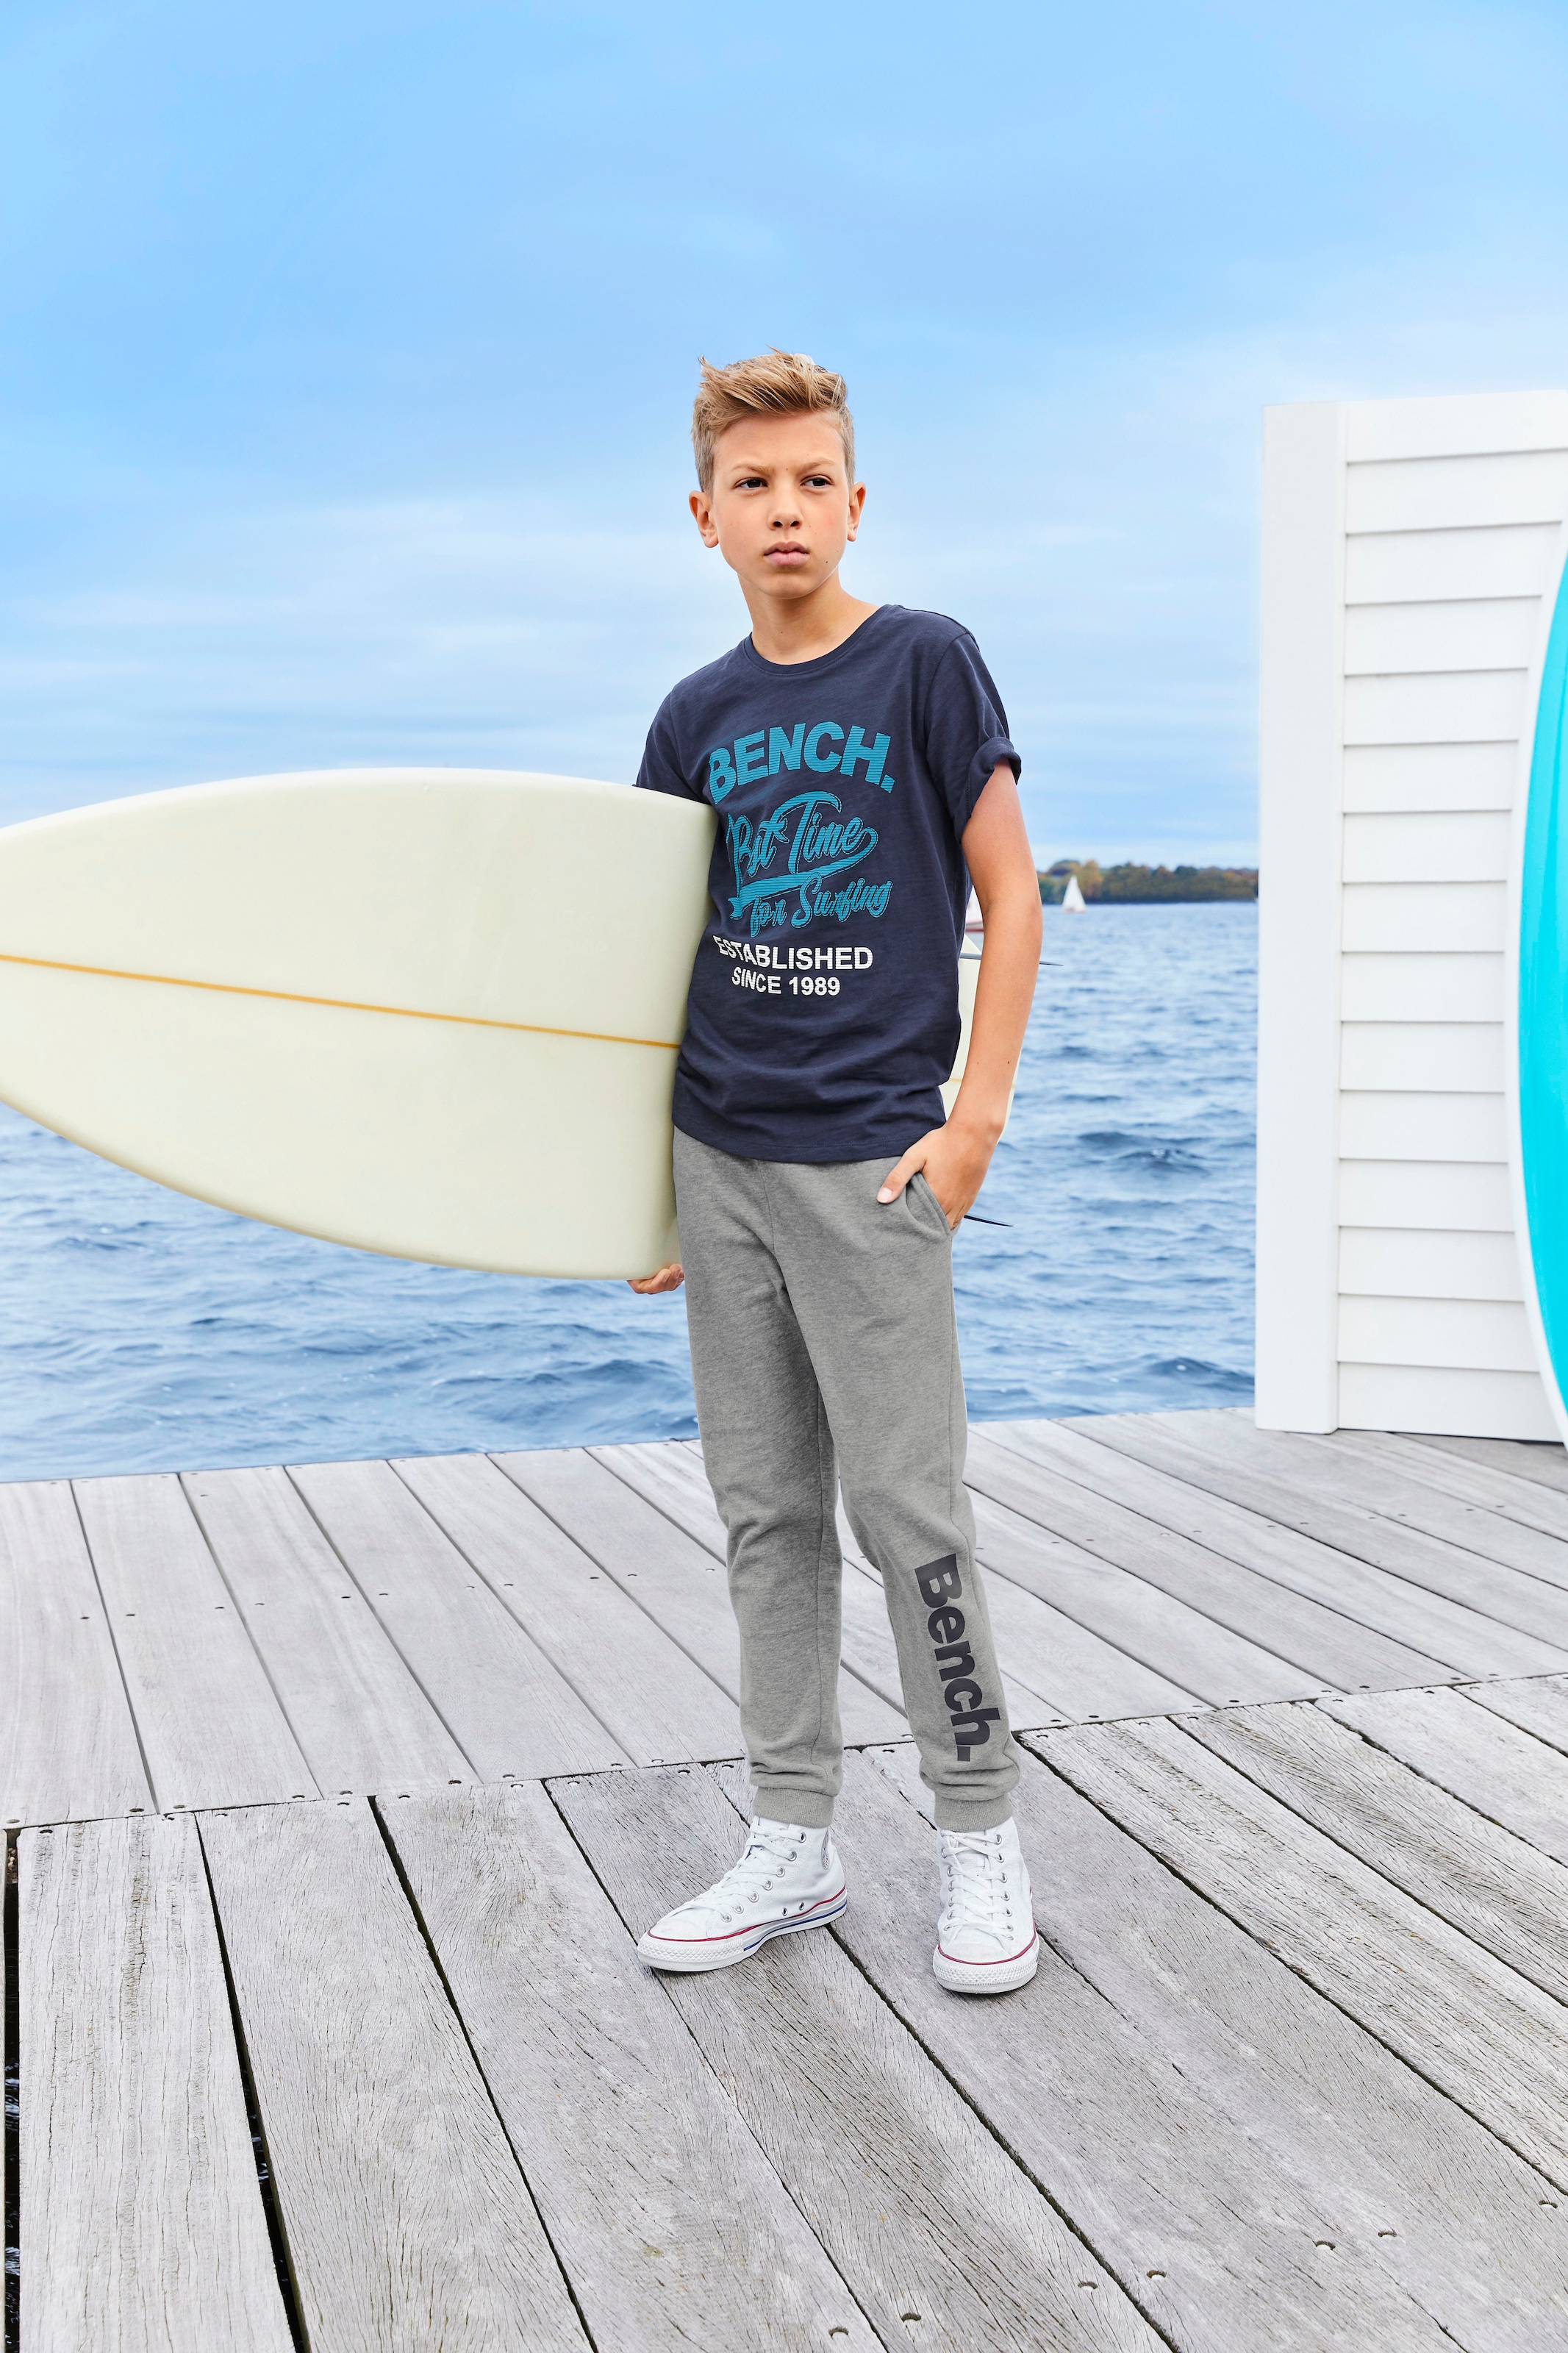 T-Shirt bei Bench. time for OTTO surfing« »Best